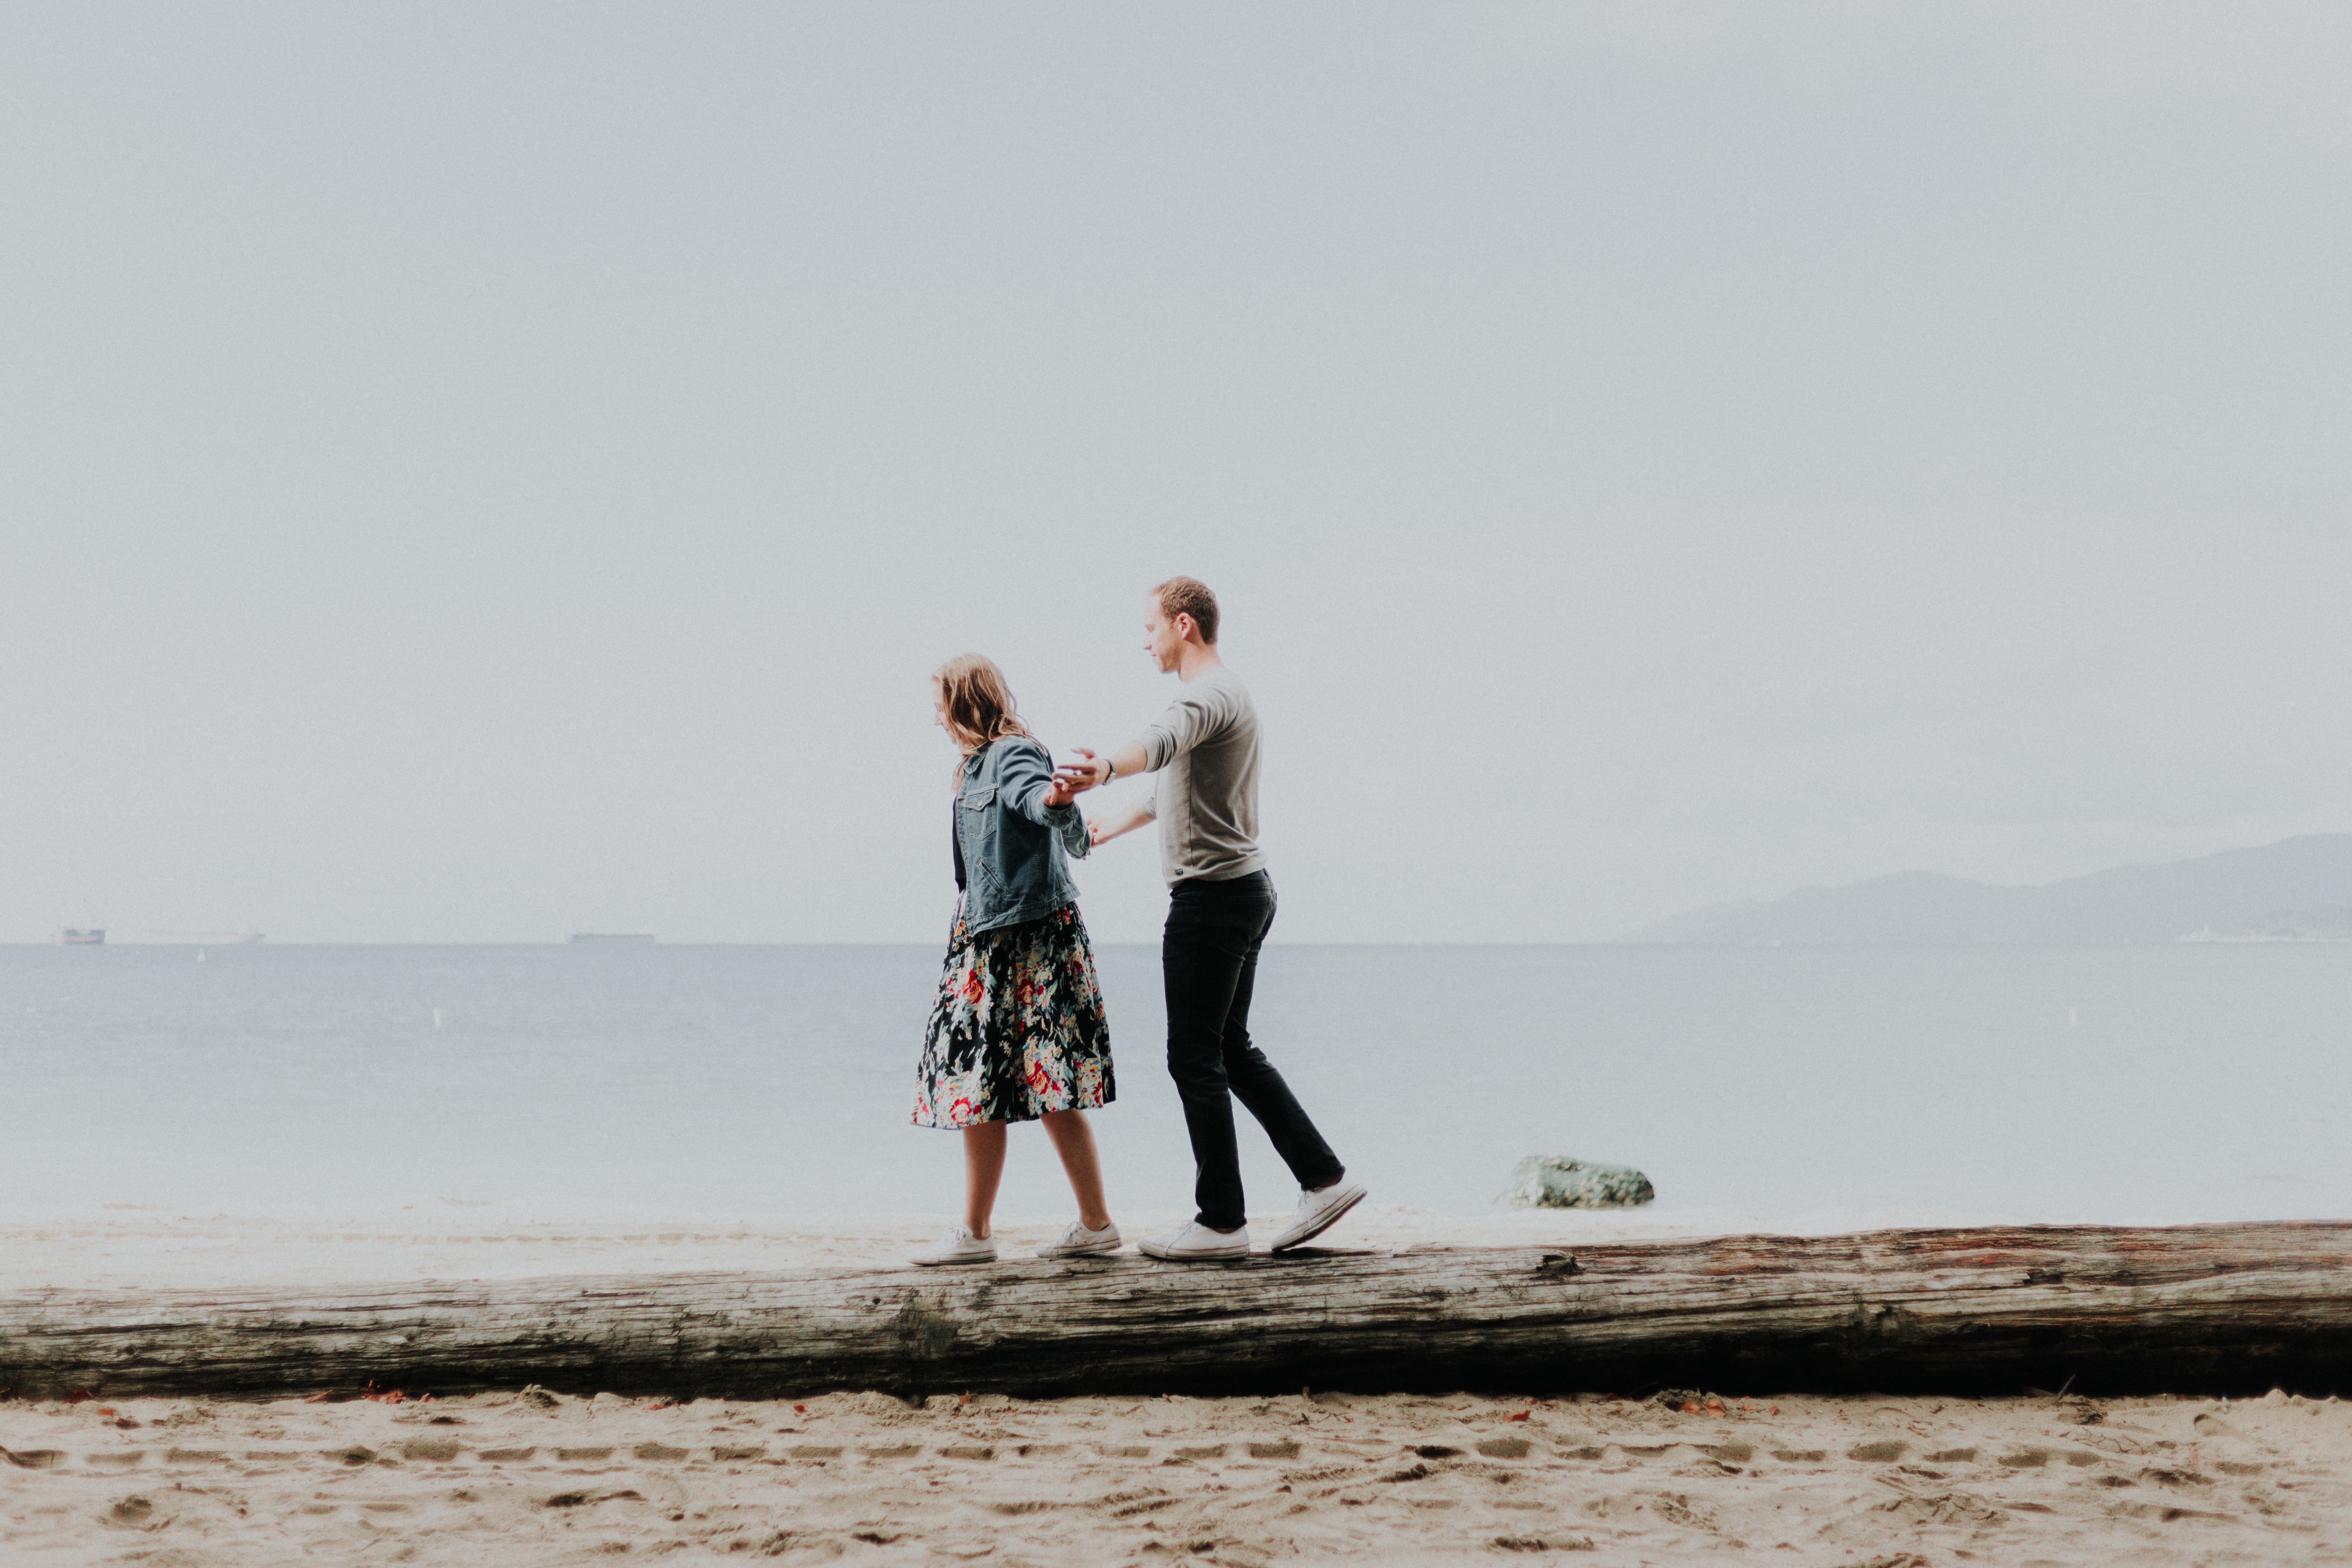 A couple balancing on a log in front of the ocean. | Source: Unsplash